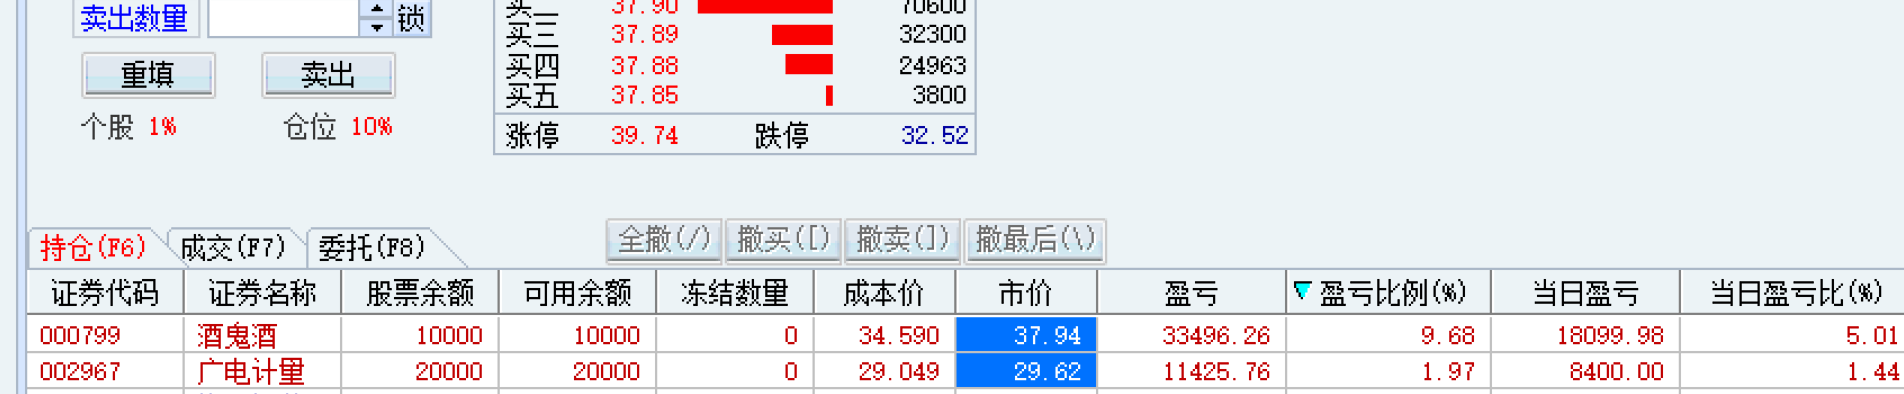 WX20191127-102444@2x.png